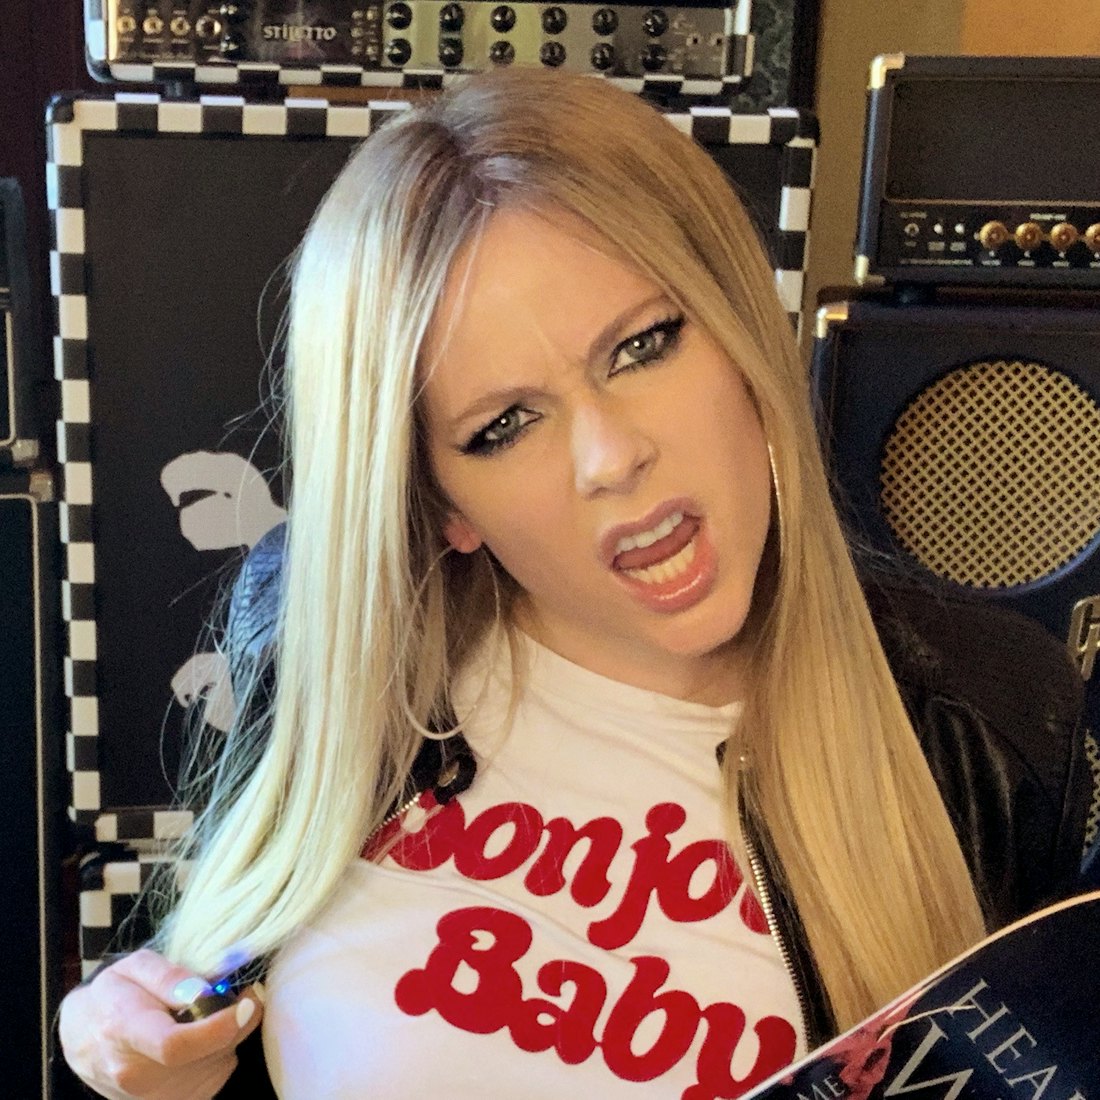 Avril Lavigne holding a skateboard surrounded by massive speakers.